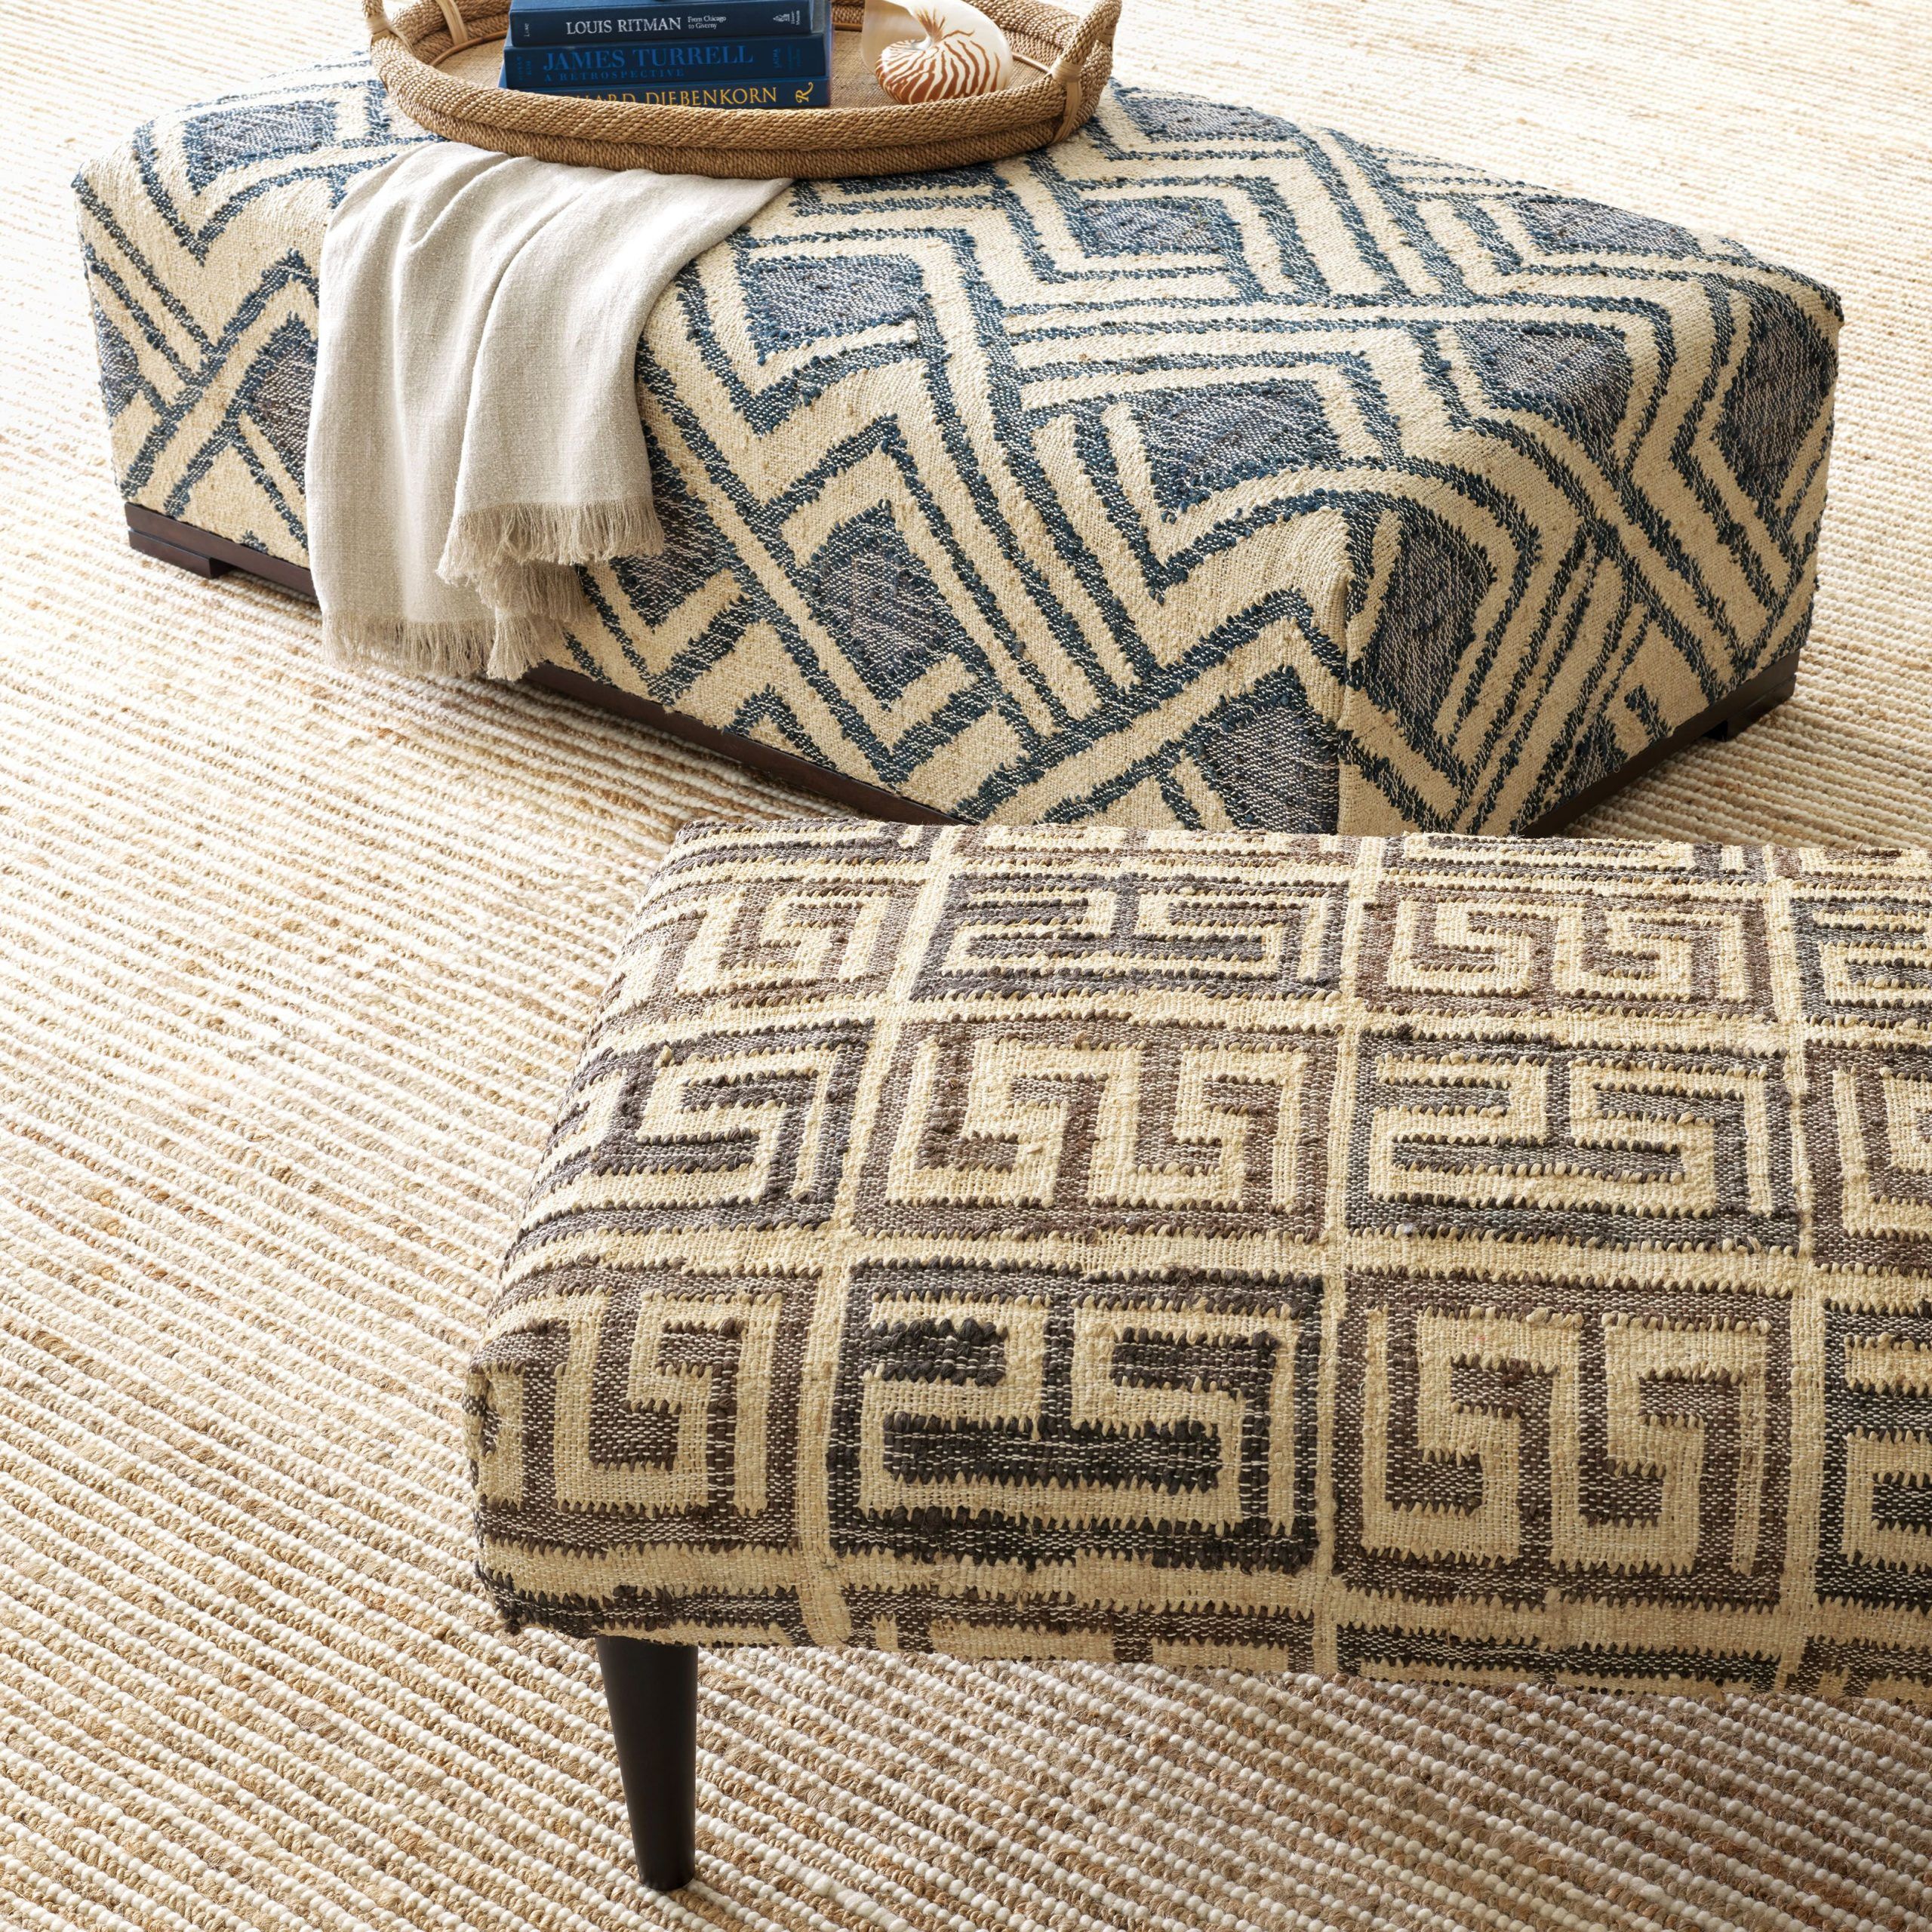 Geometric Patterned Ottomans Are An Easy Way Add Color And Texture To Throughout Textured Gray Cuboid Pouf Ottomans (View 11 of 20)